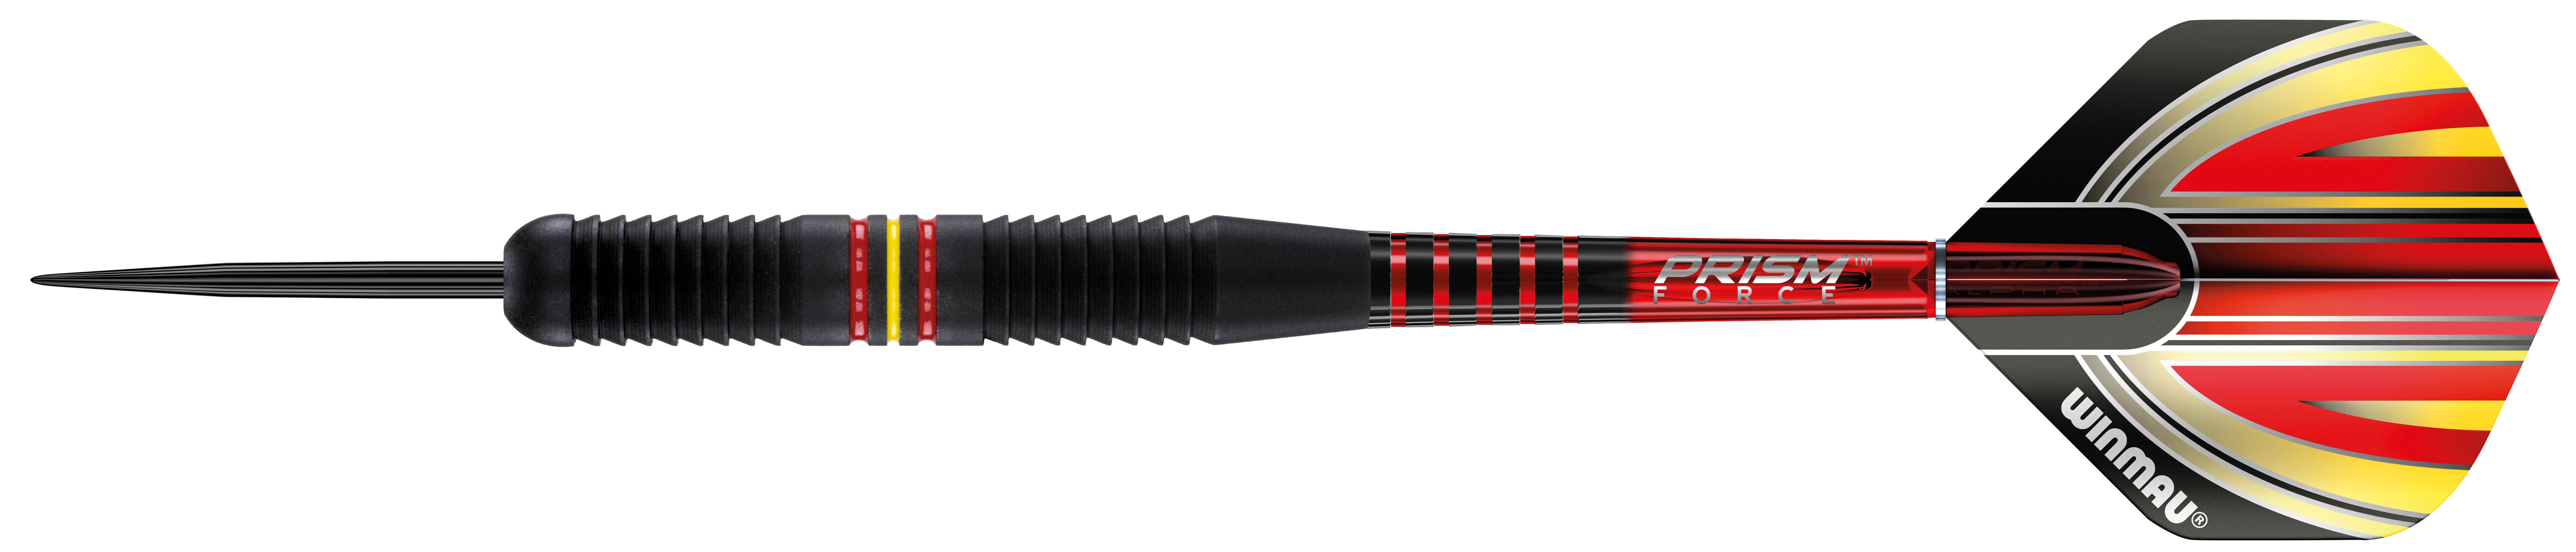 Outrage Brass Steel Tipped Darts - 22g - Left